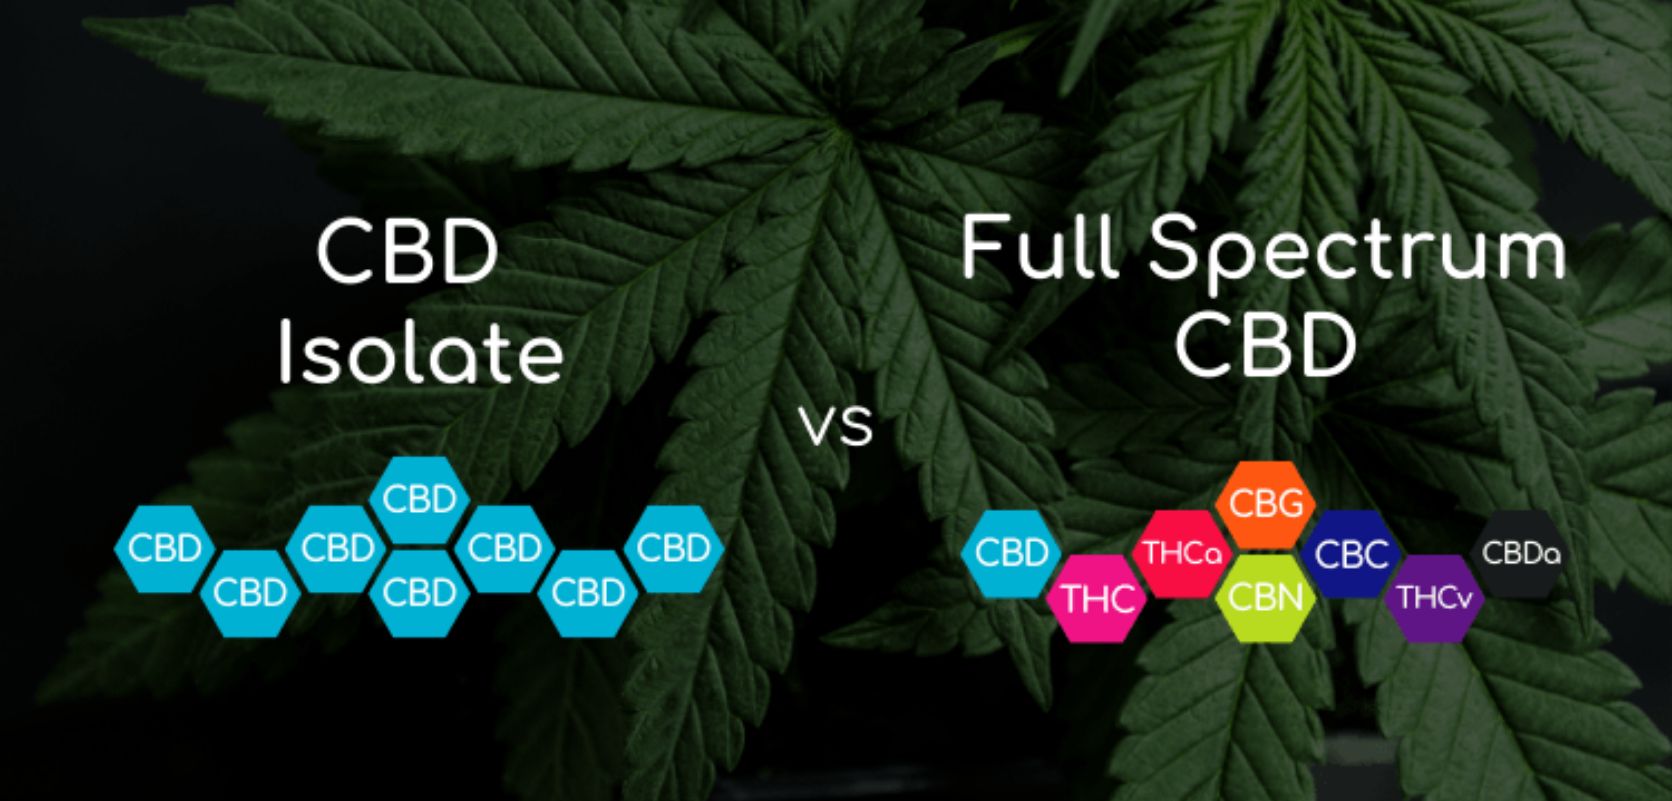 As we touched on earlier in this guide, let's take another moment to spotlight the fundamental differences between full-spectrum CBD and CBD isolate.